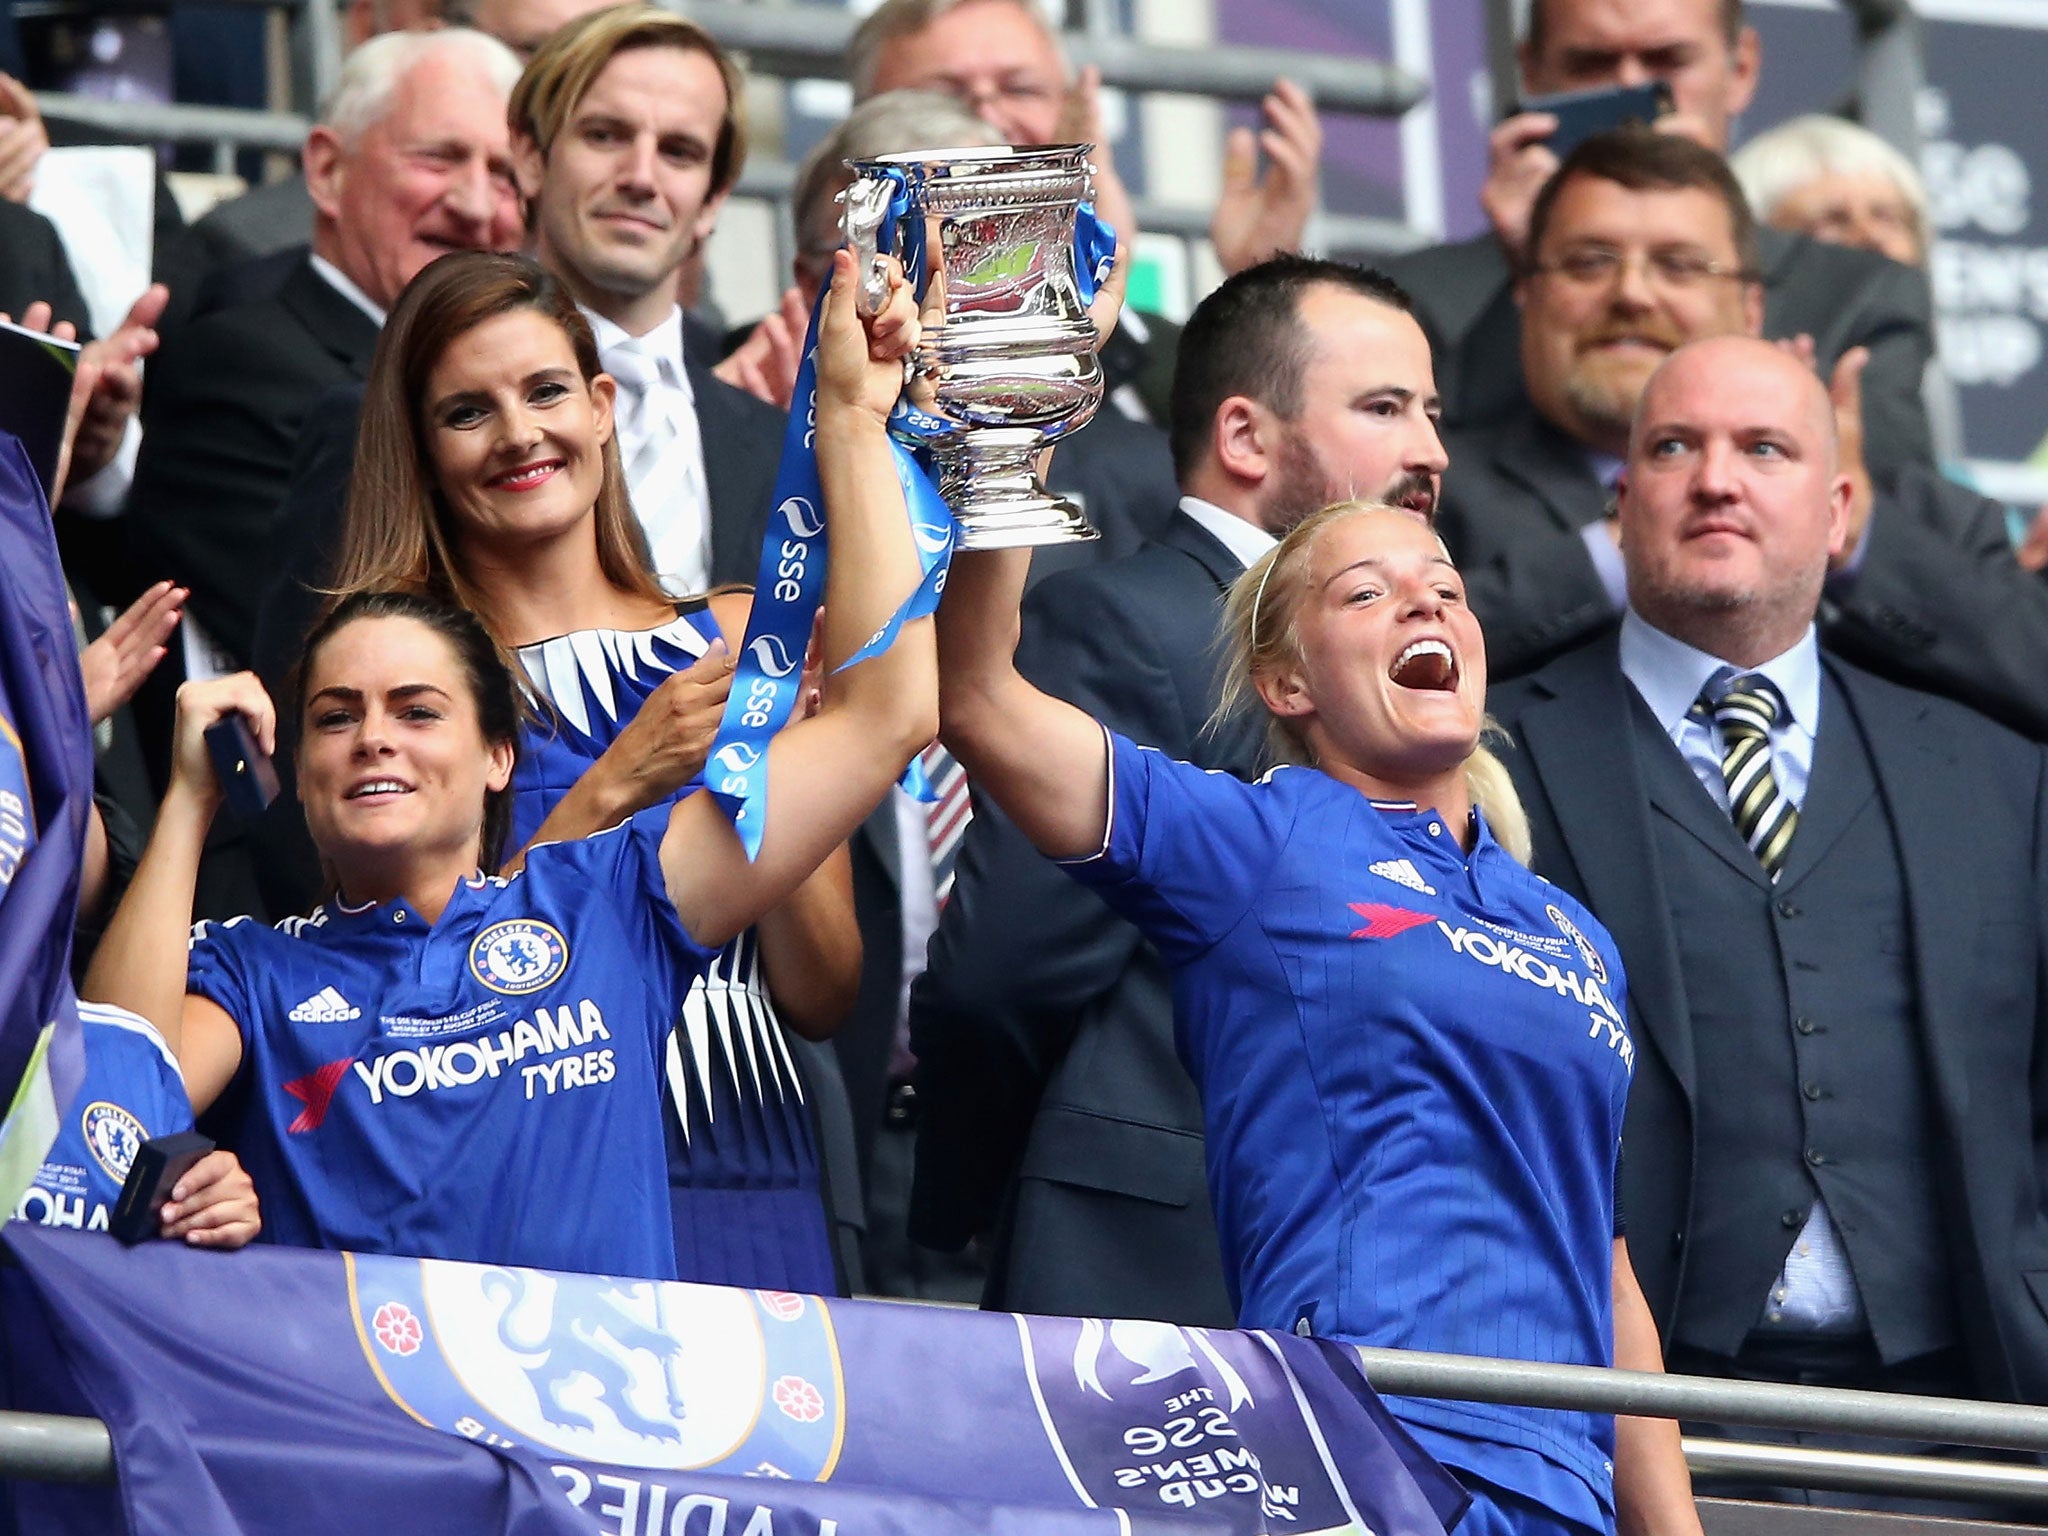 Chelsea players Claire Rafferty and Katie Chapman raise the FA Cup